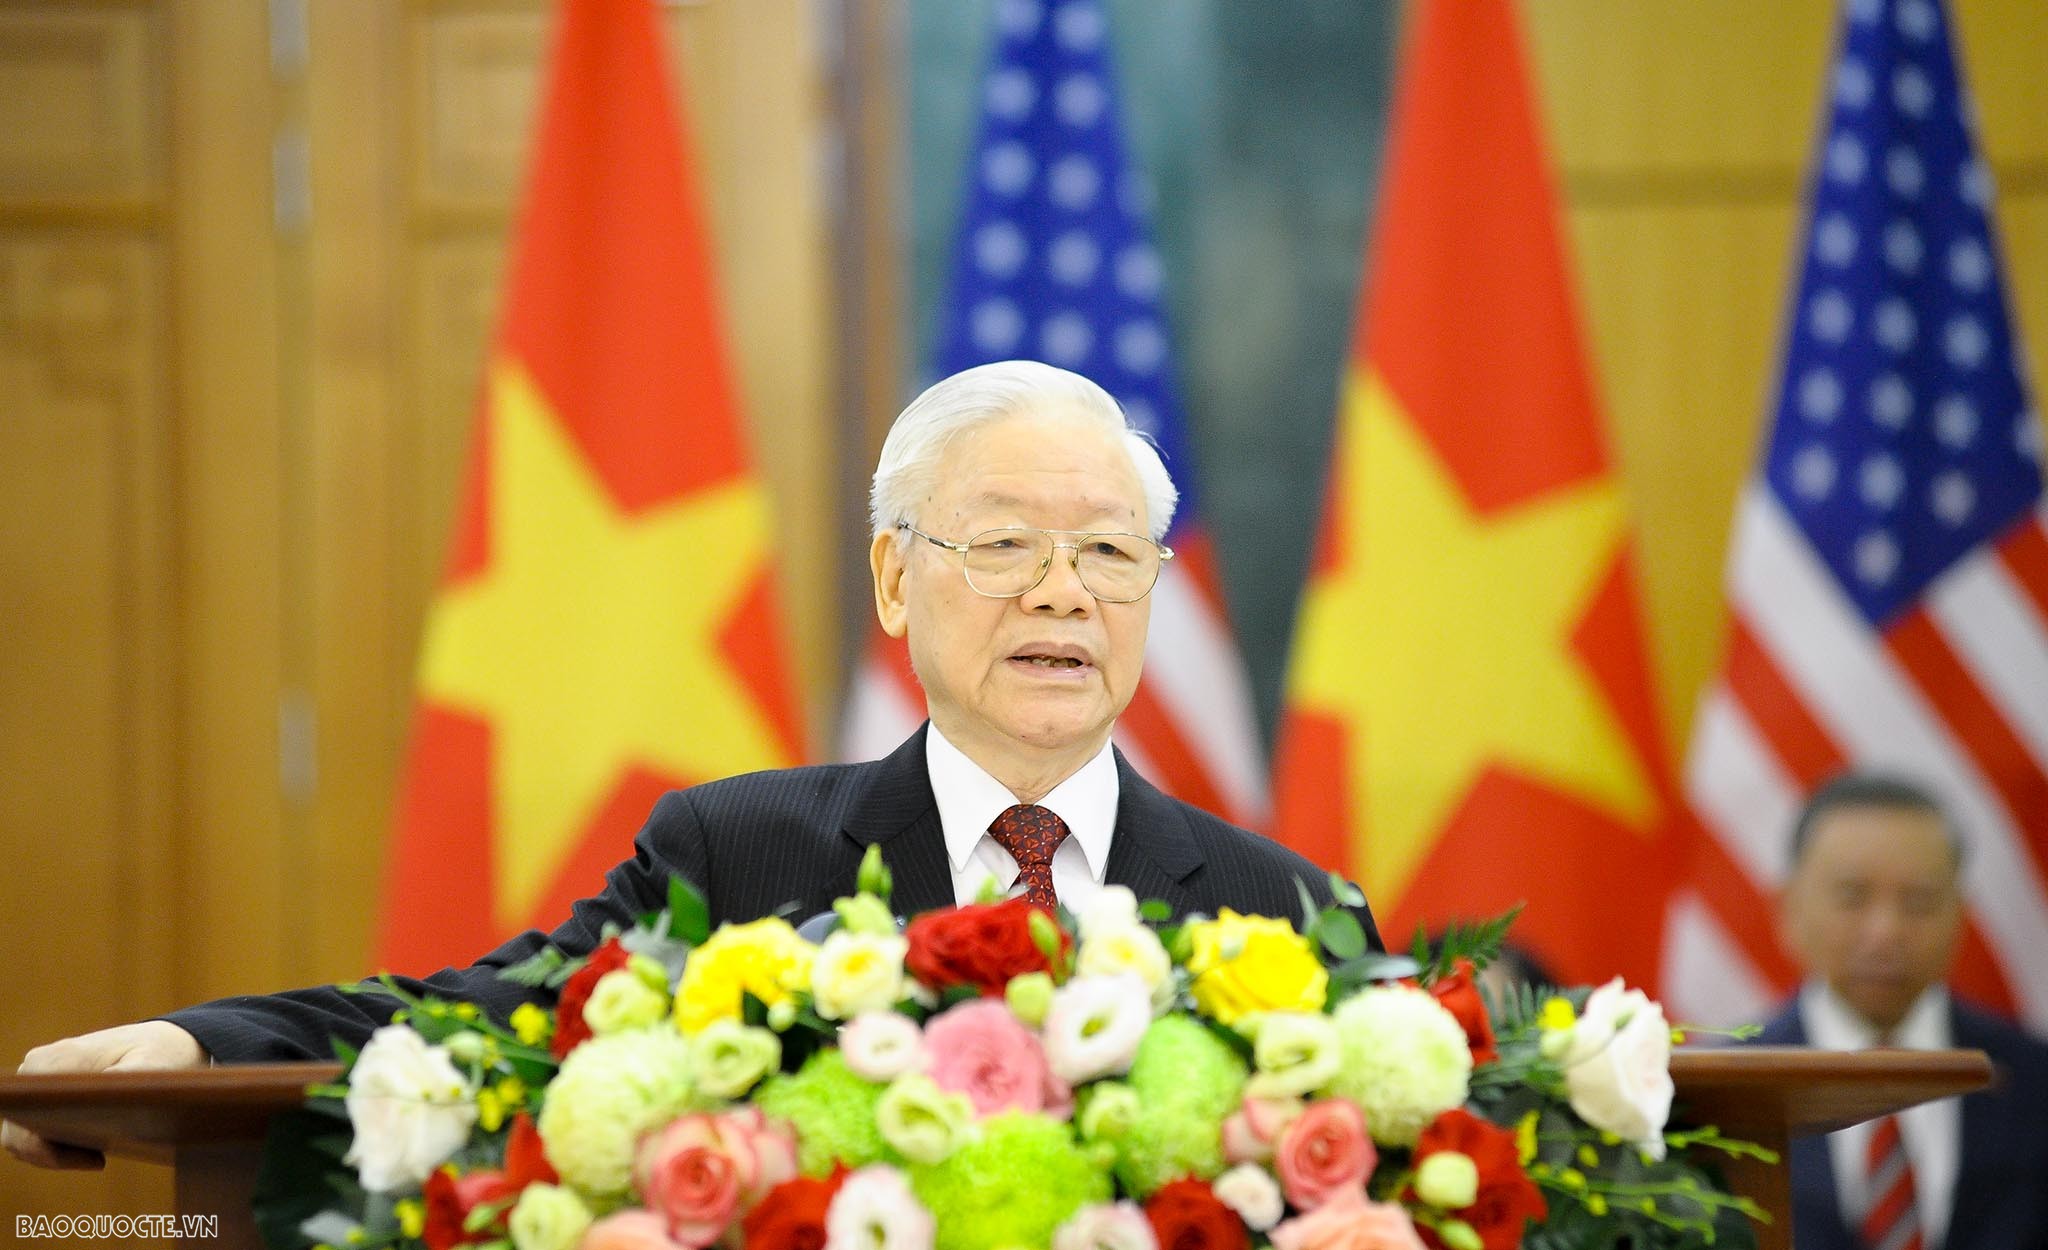 Party General Secretary Nguyen Phu Trong’s address to the press after talks with US President